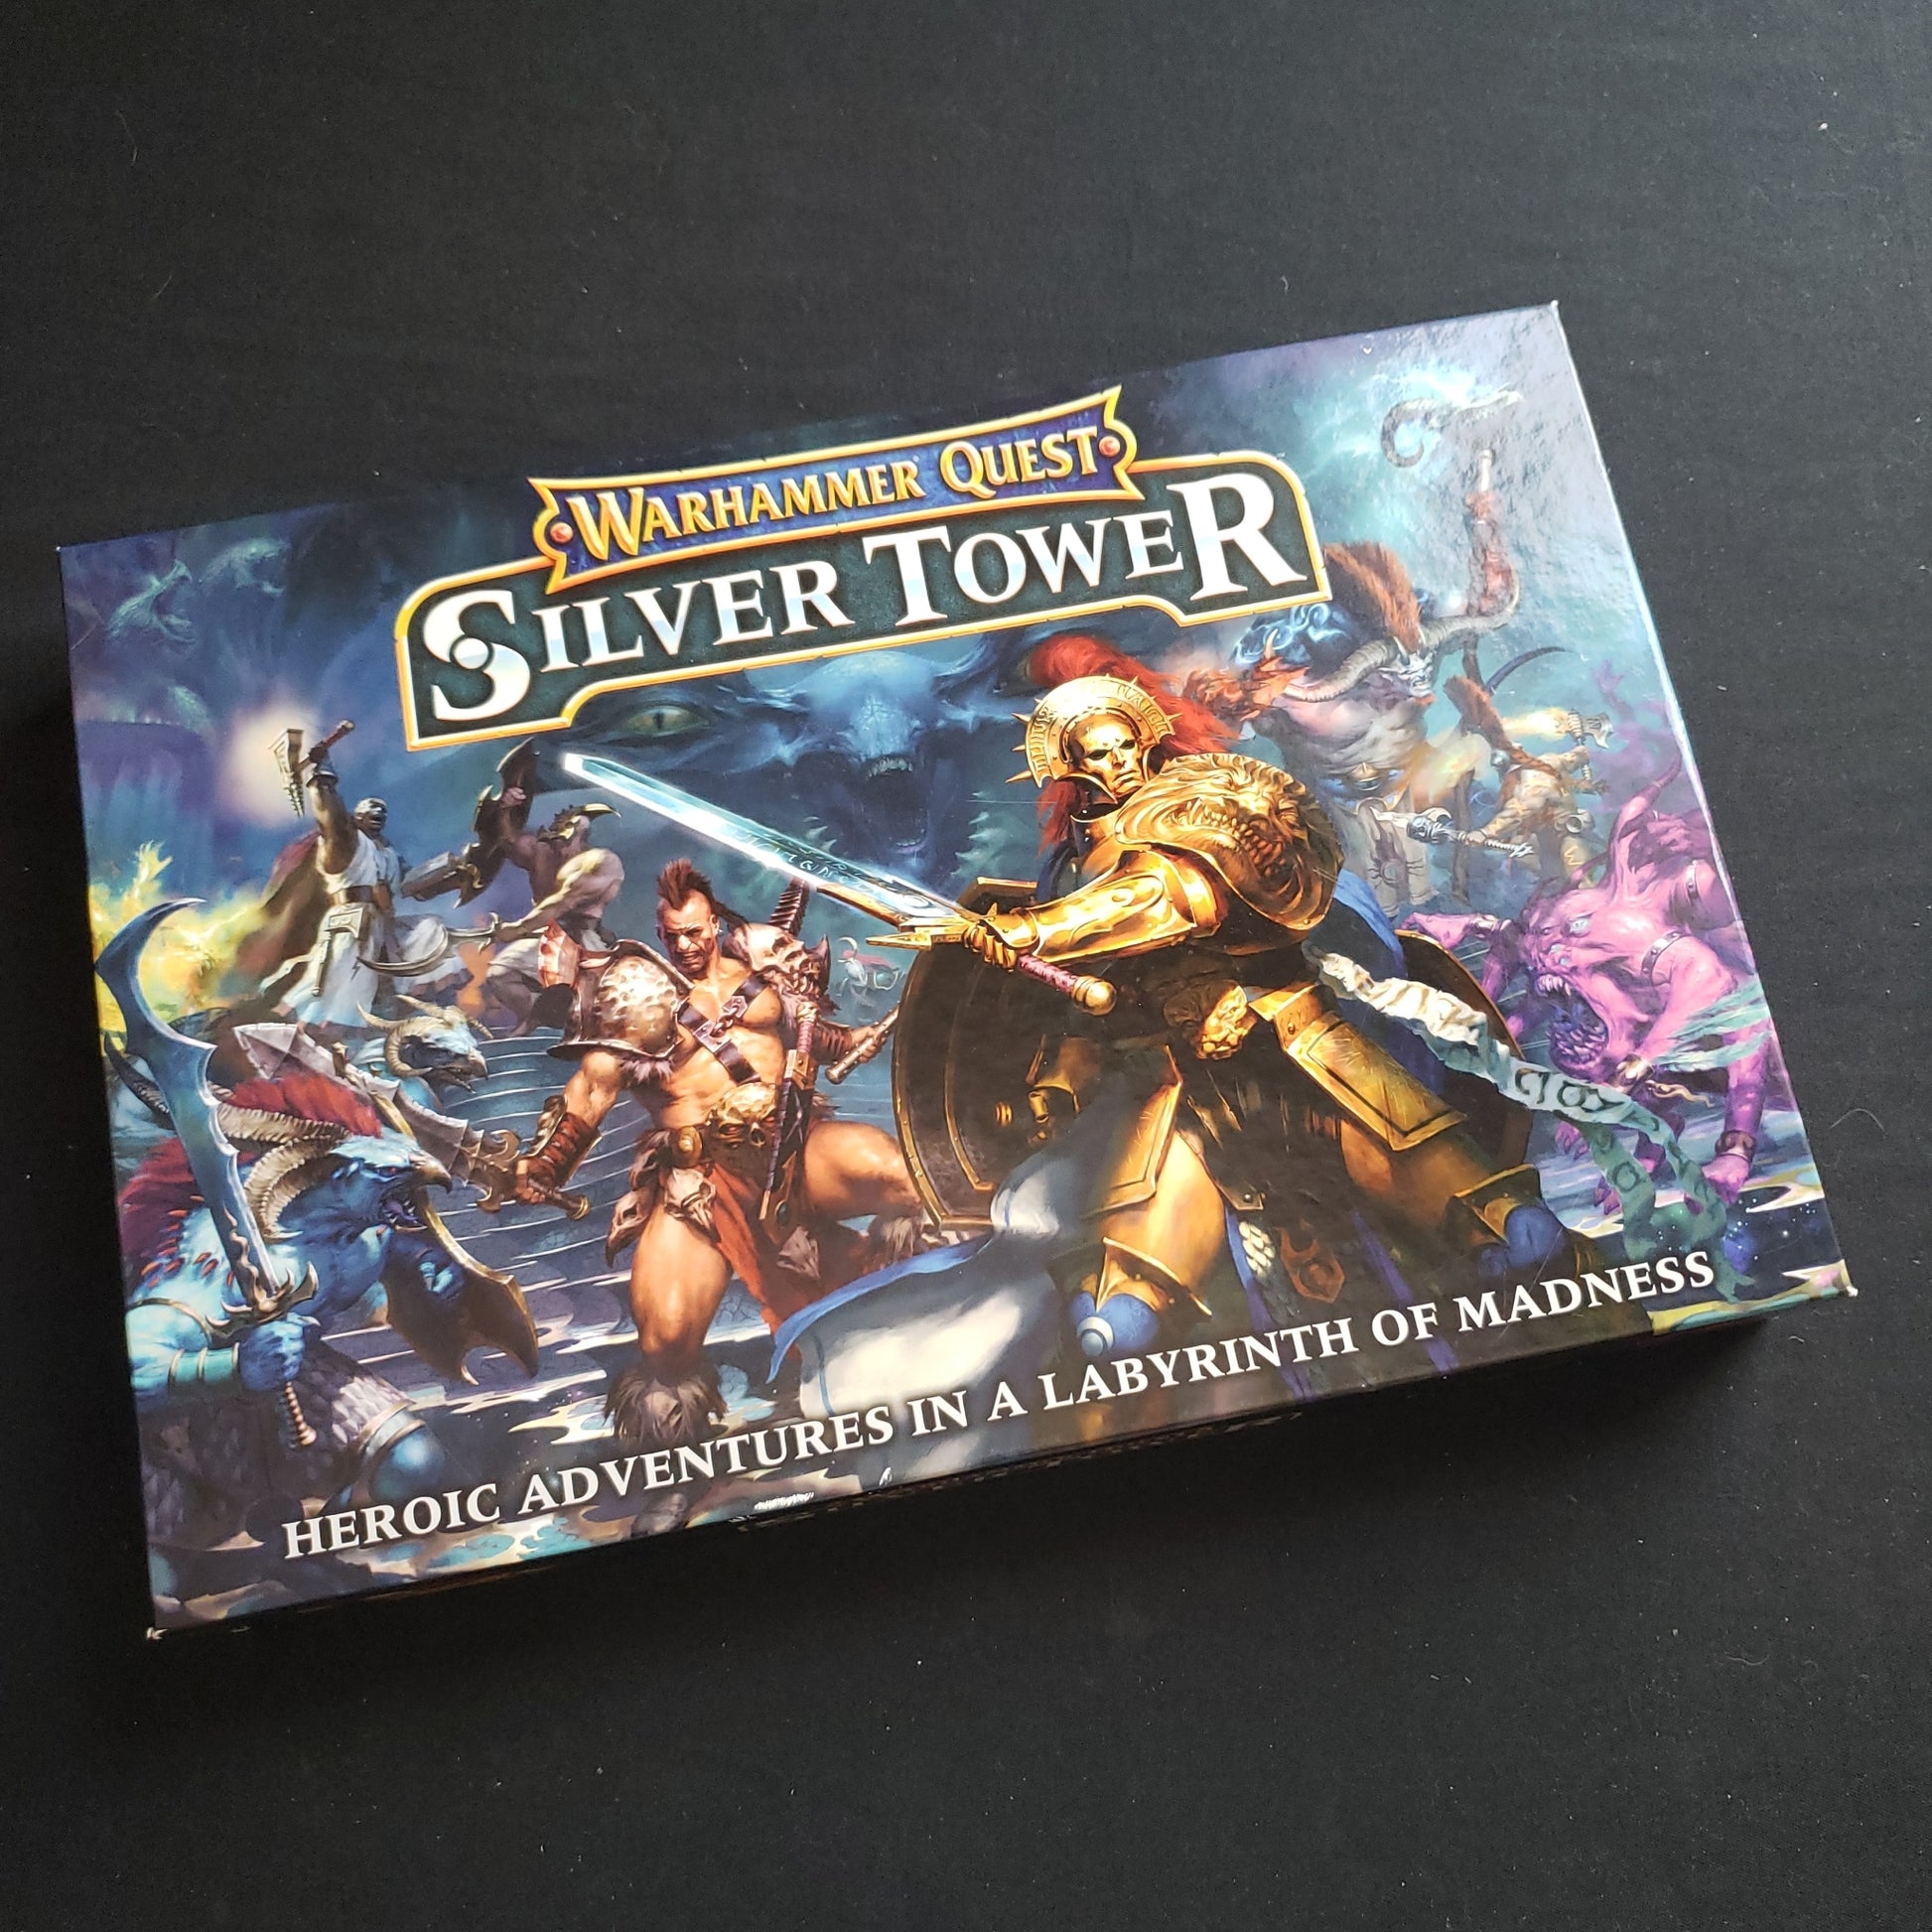 Image shows the front cover of the box of the Warhammer Quest: Silver Tower board game